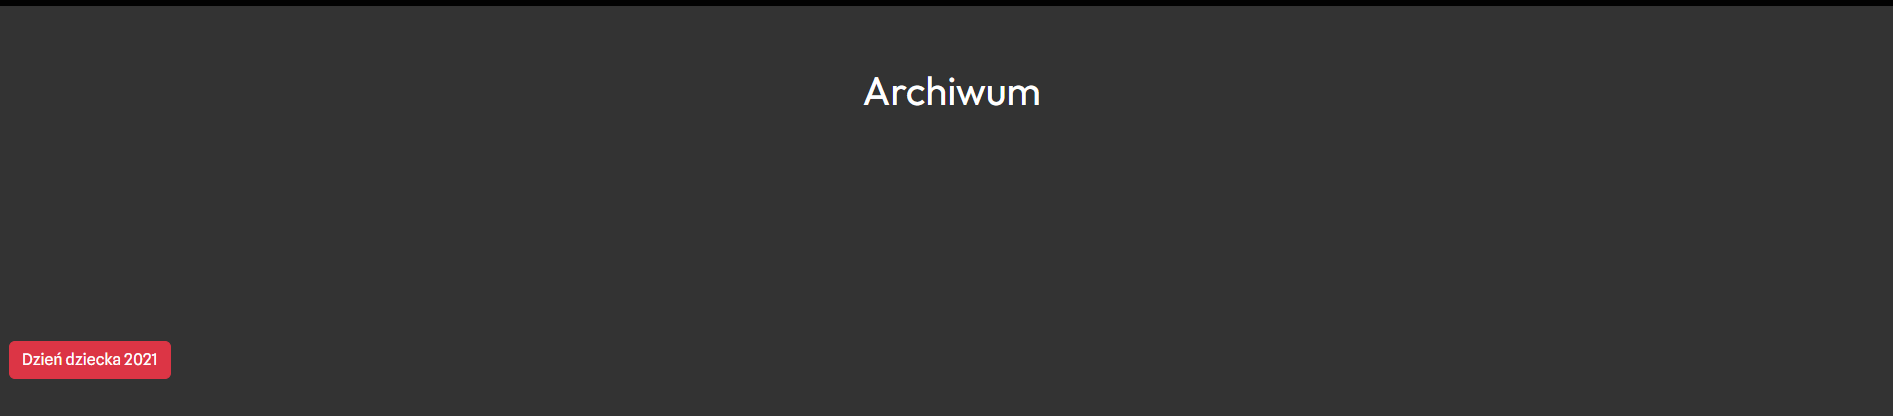 Archiwum old